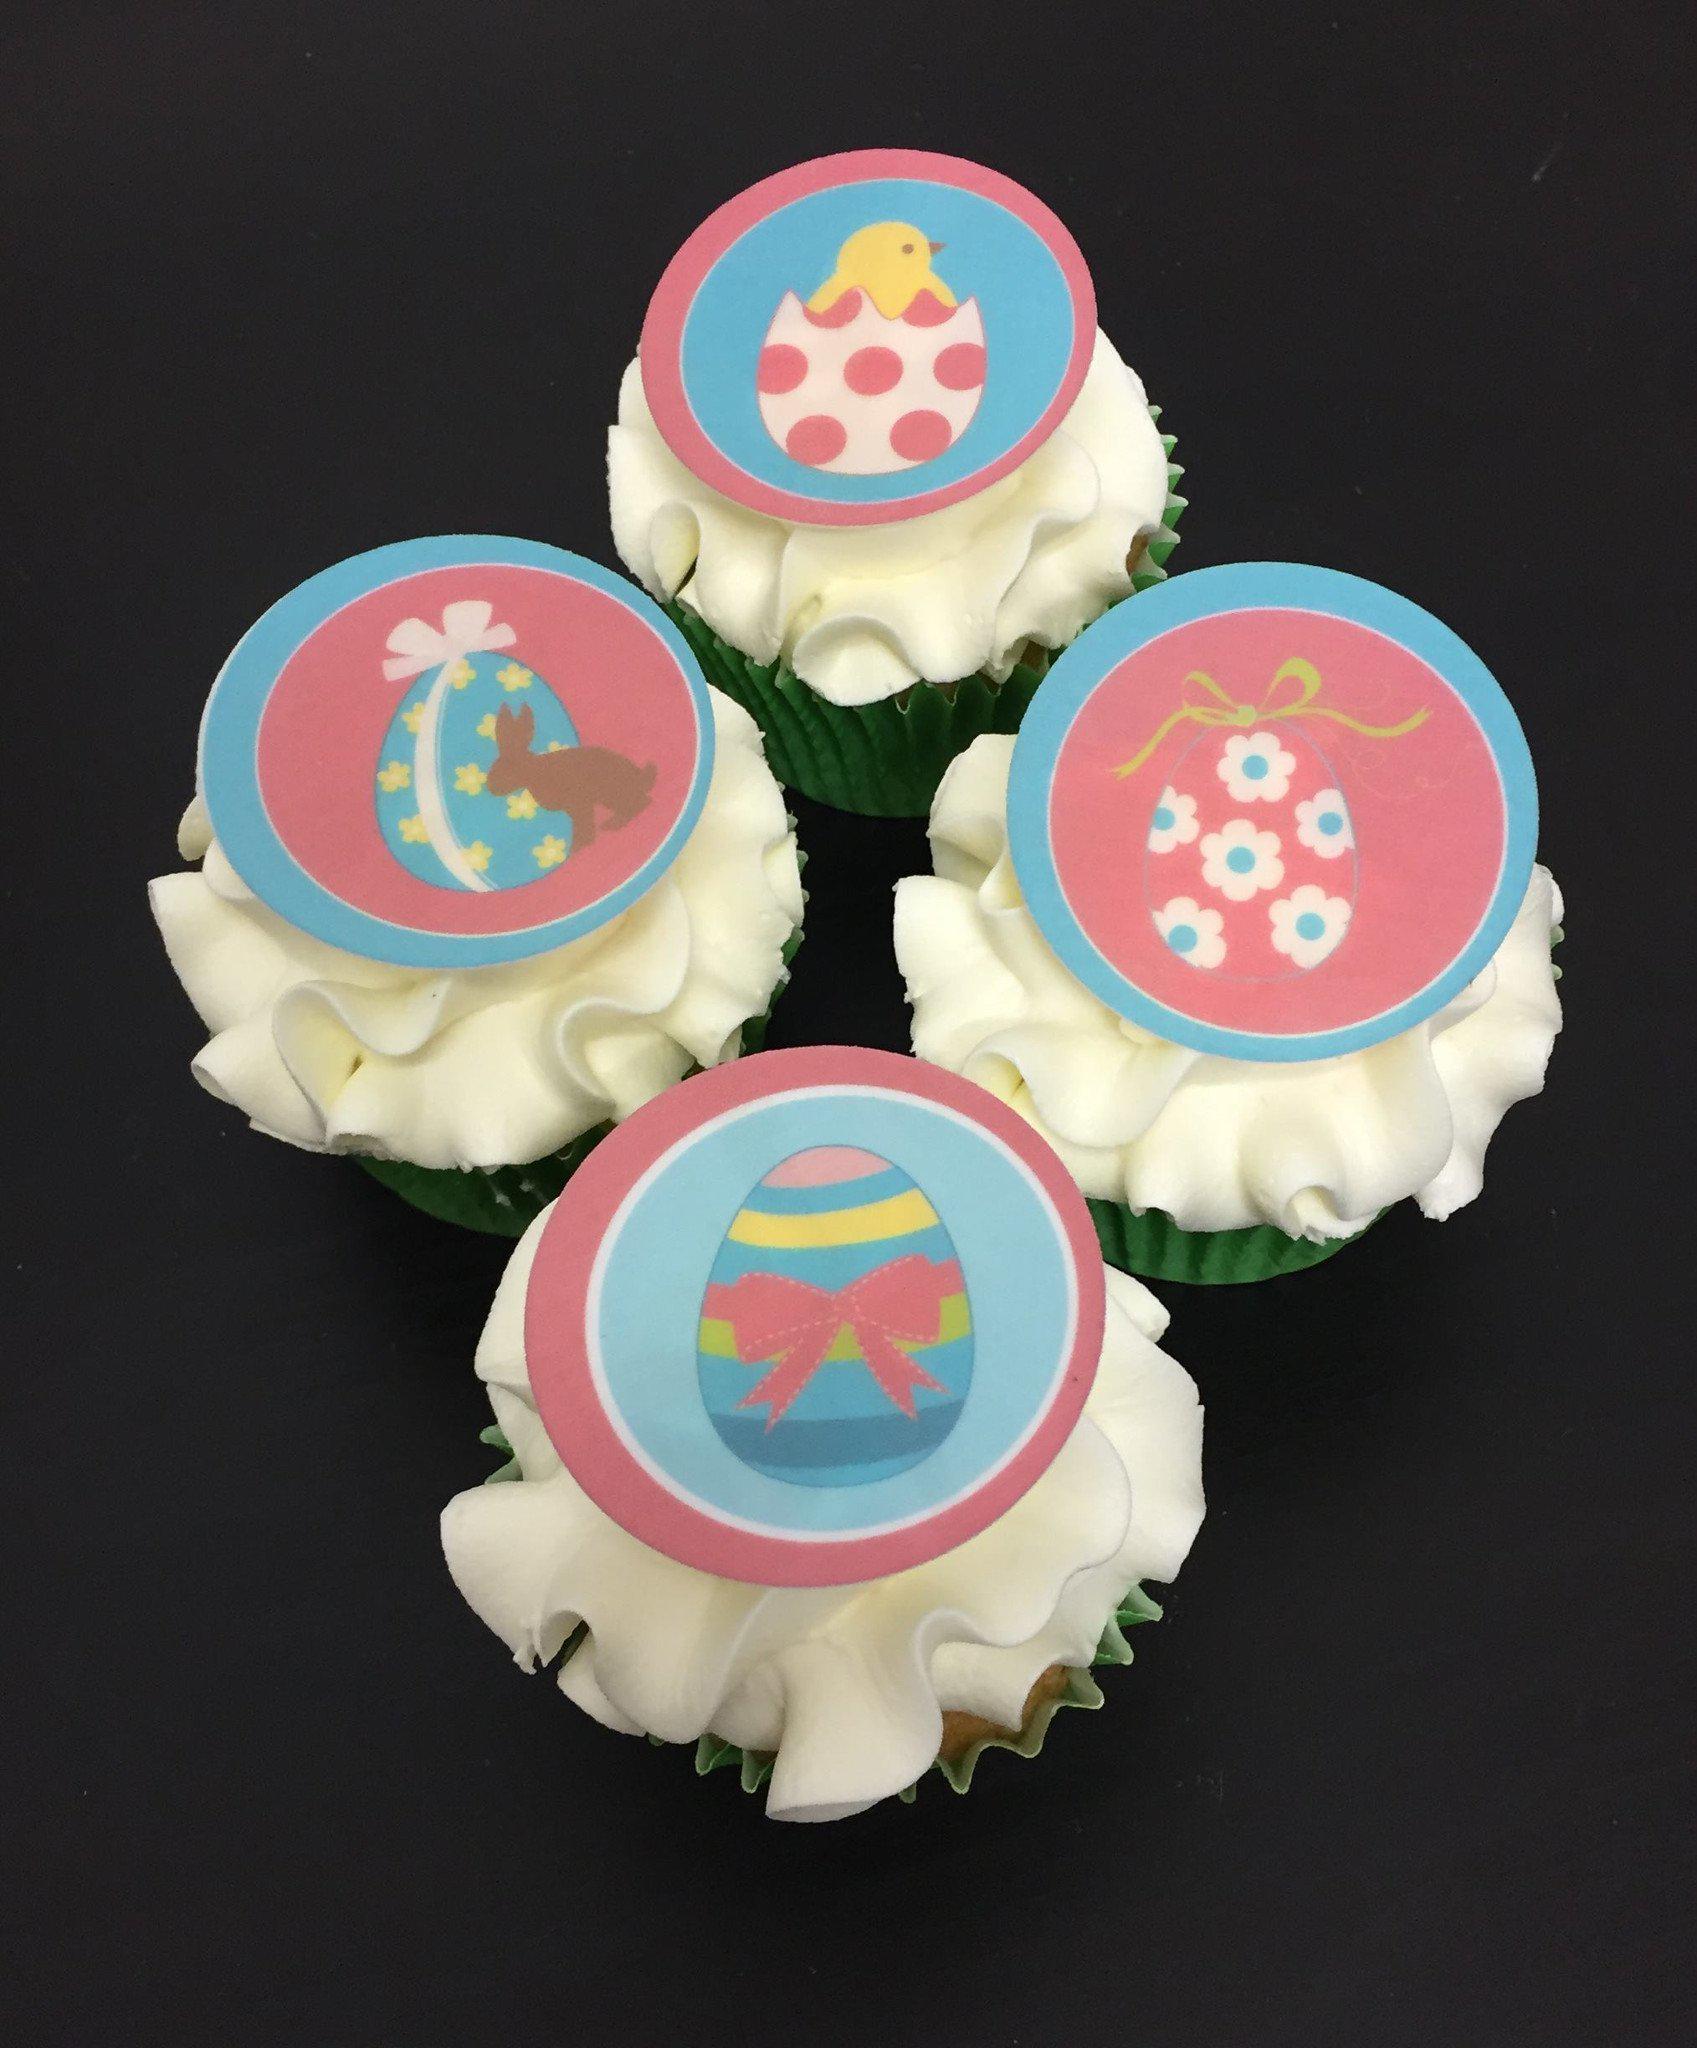 Printed cupcake toppers with pink and aqua Easter Egg designs